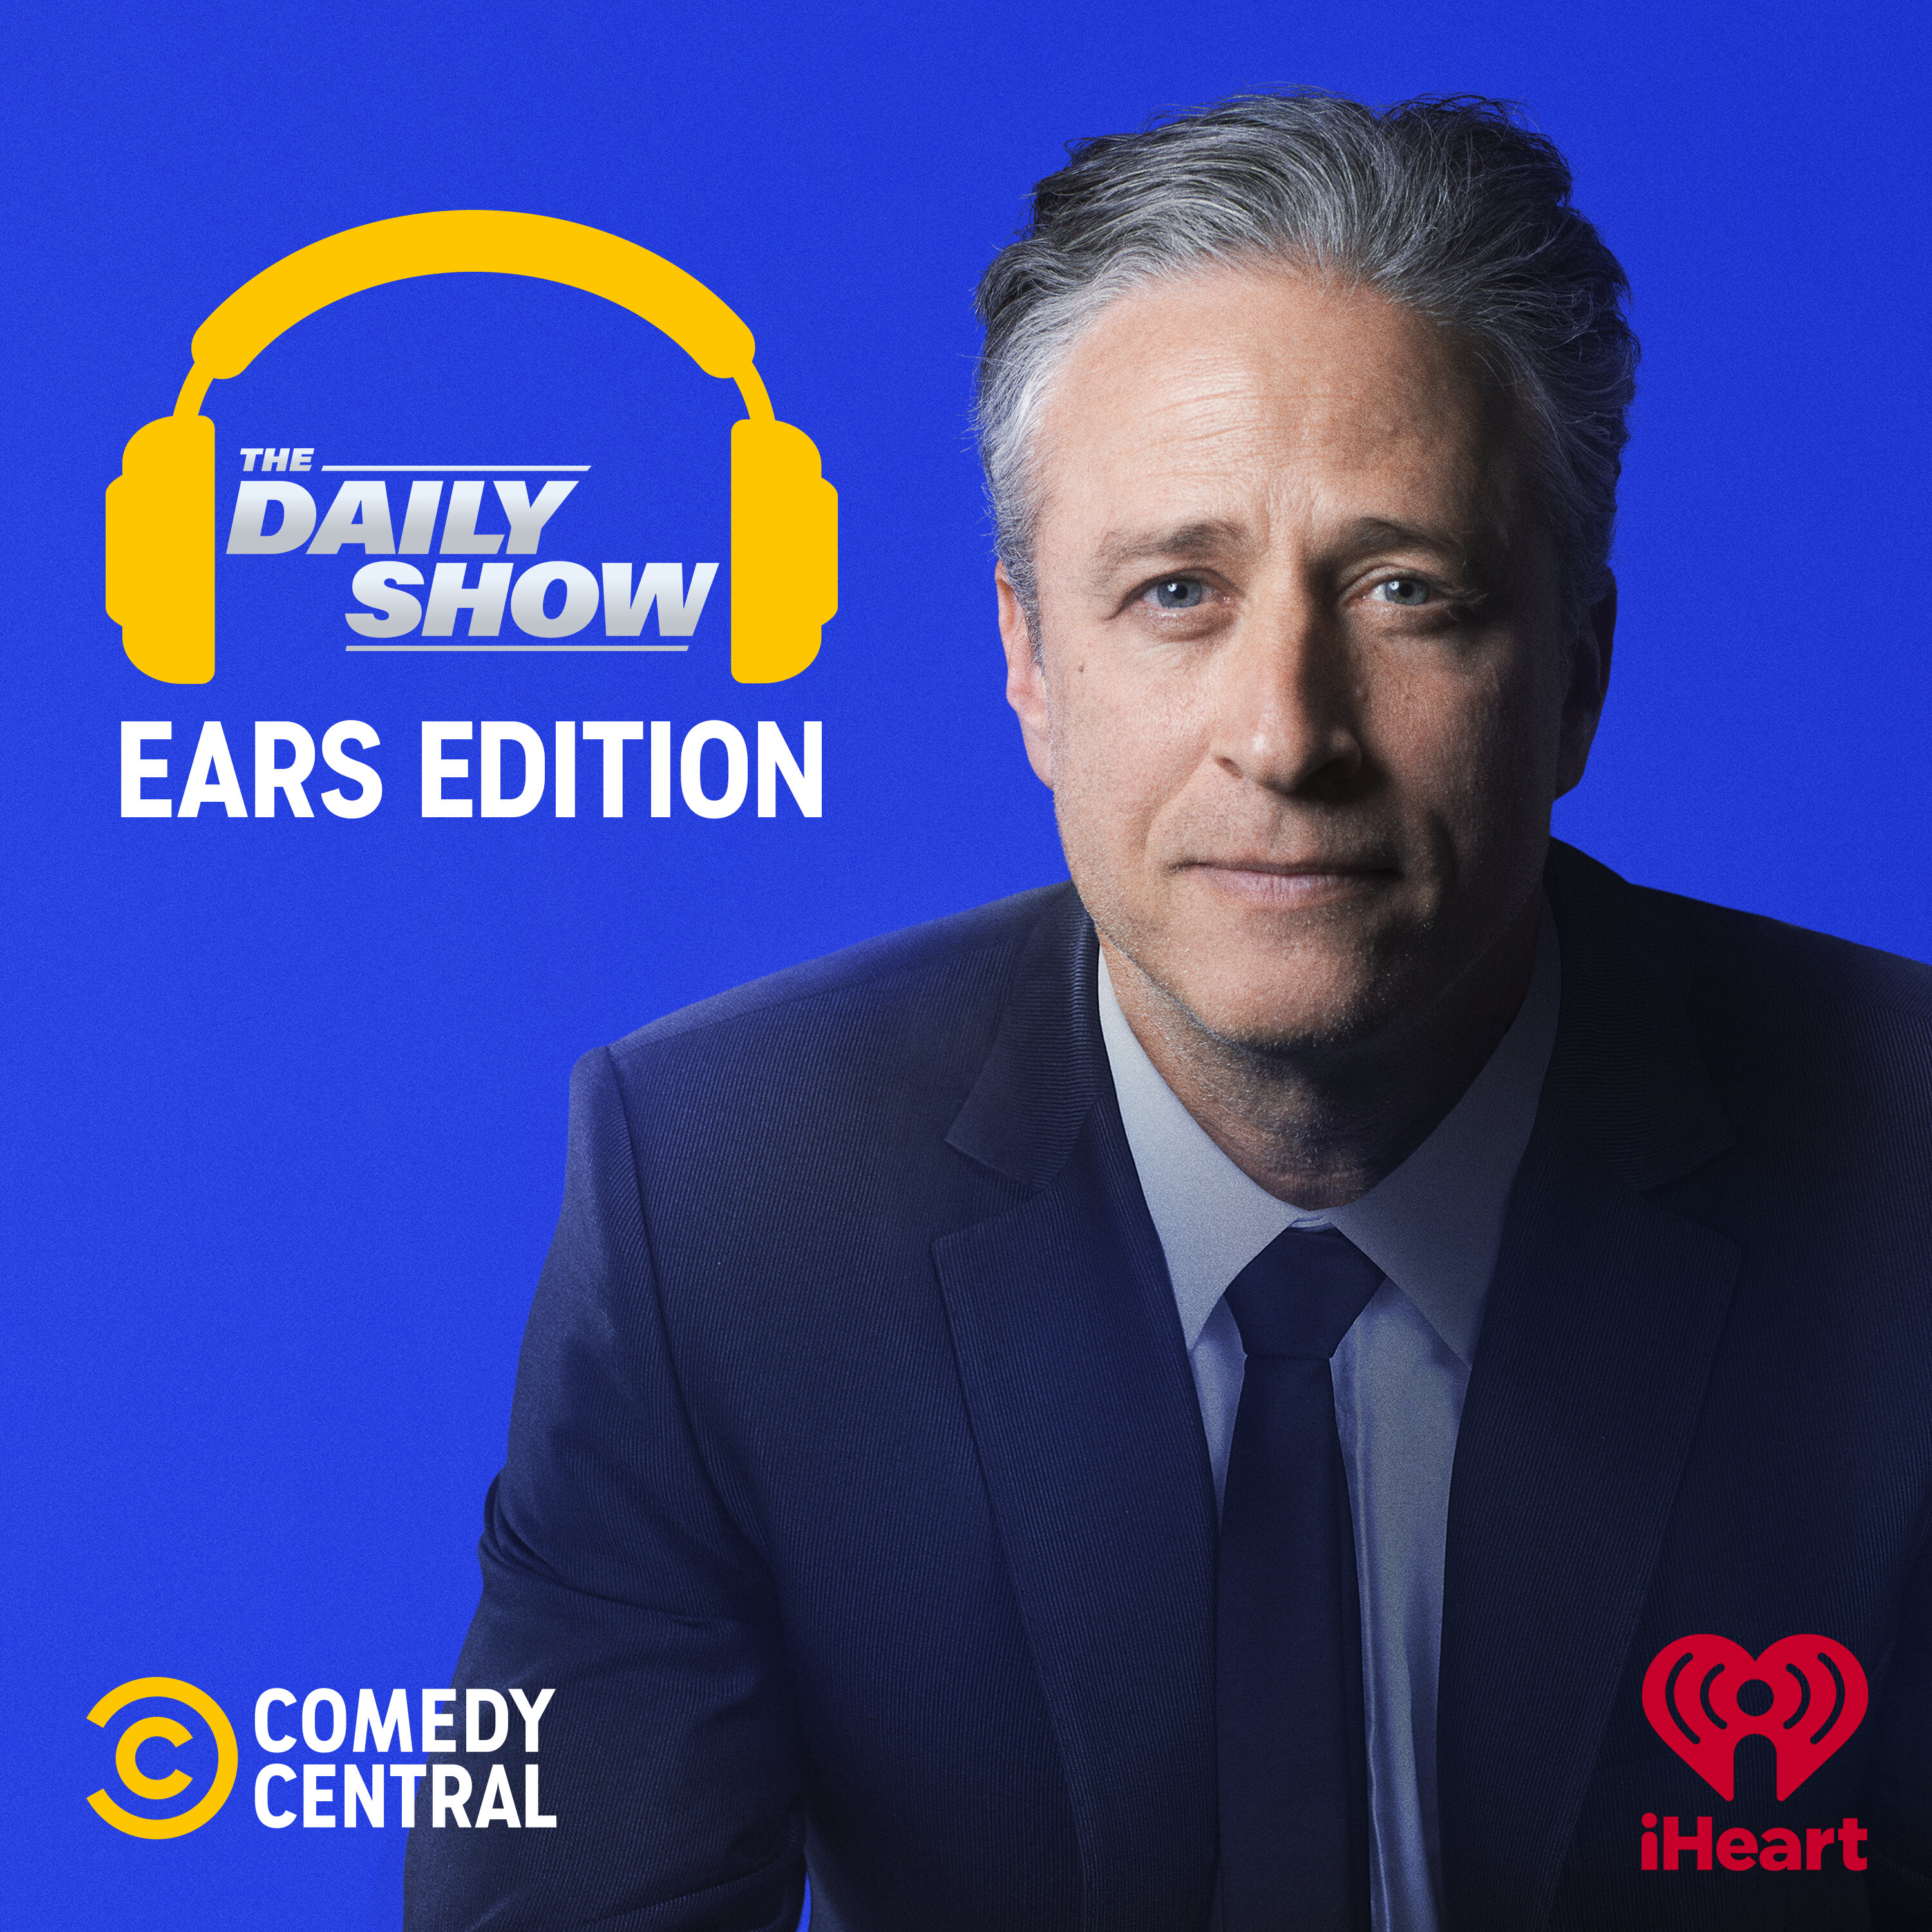 The Daily Show With Trevor Noah: Ears Edition podcast